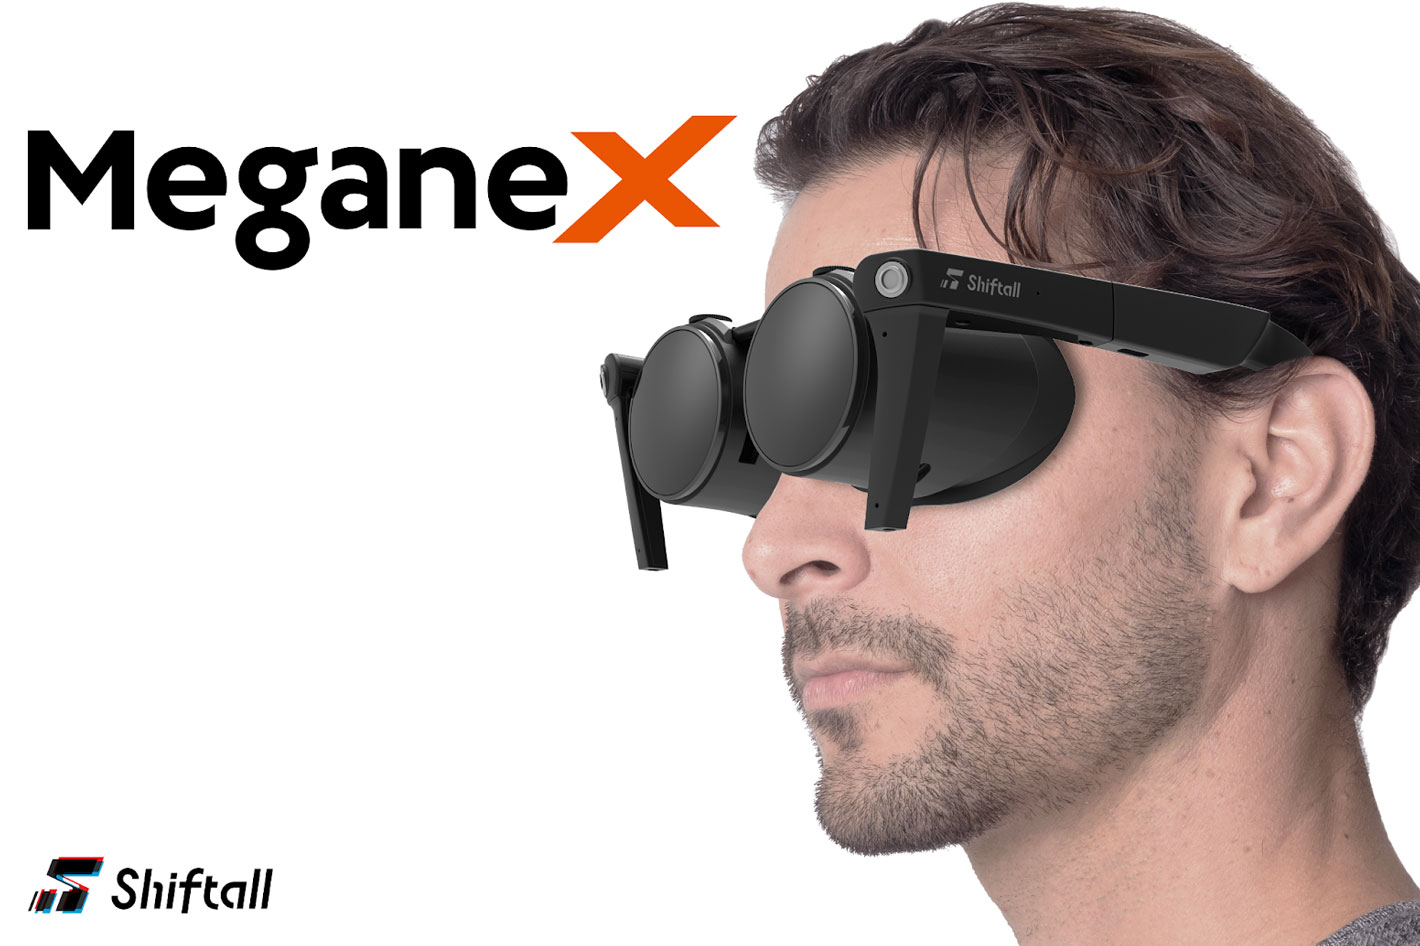 MeganeX: a 5.2K HDR VR headset for Virtual Production